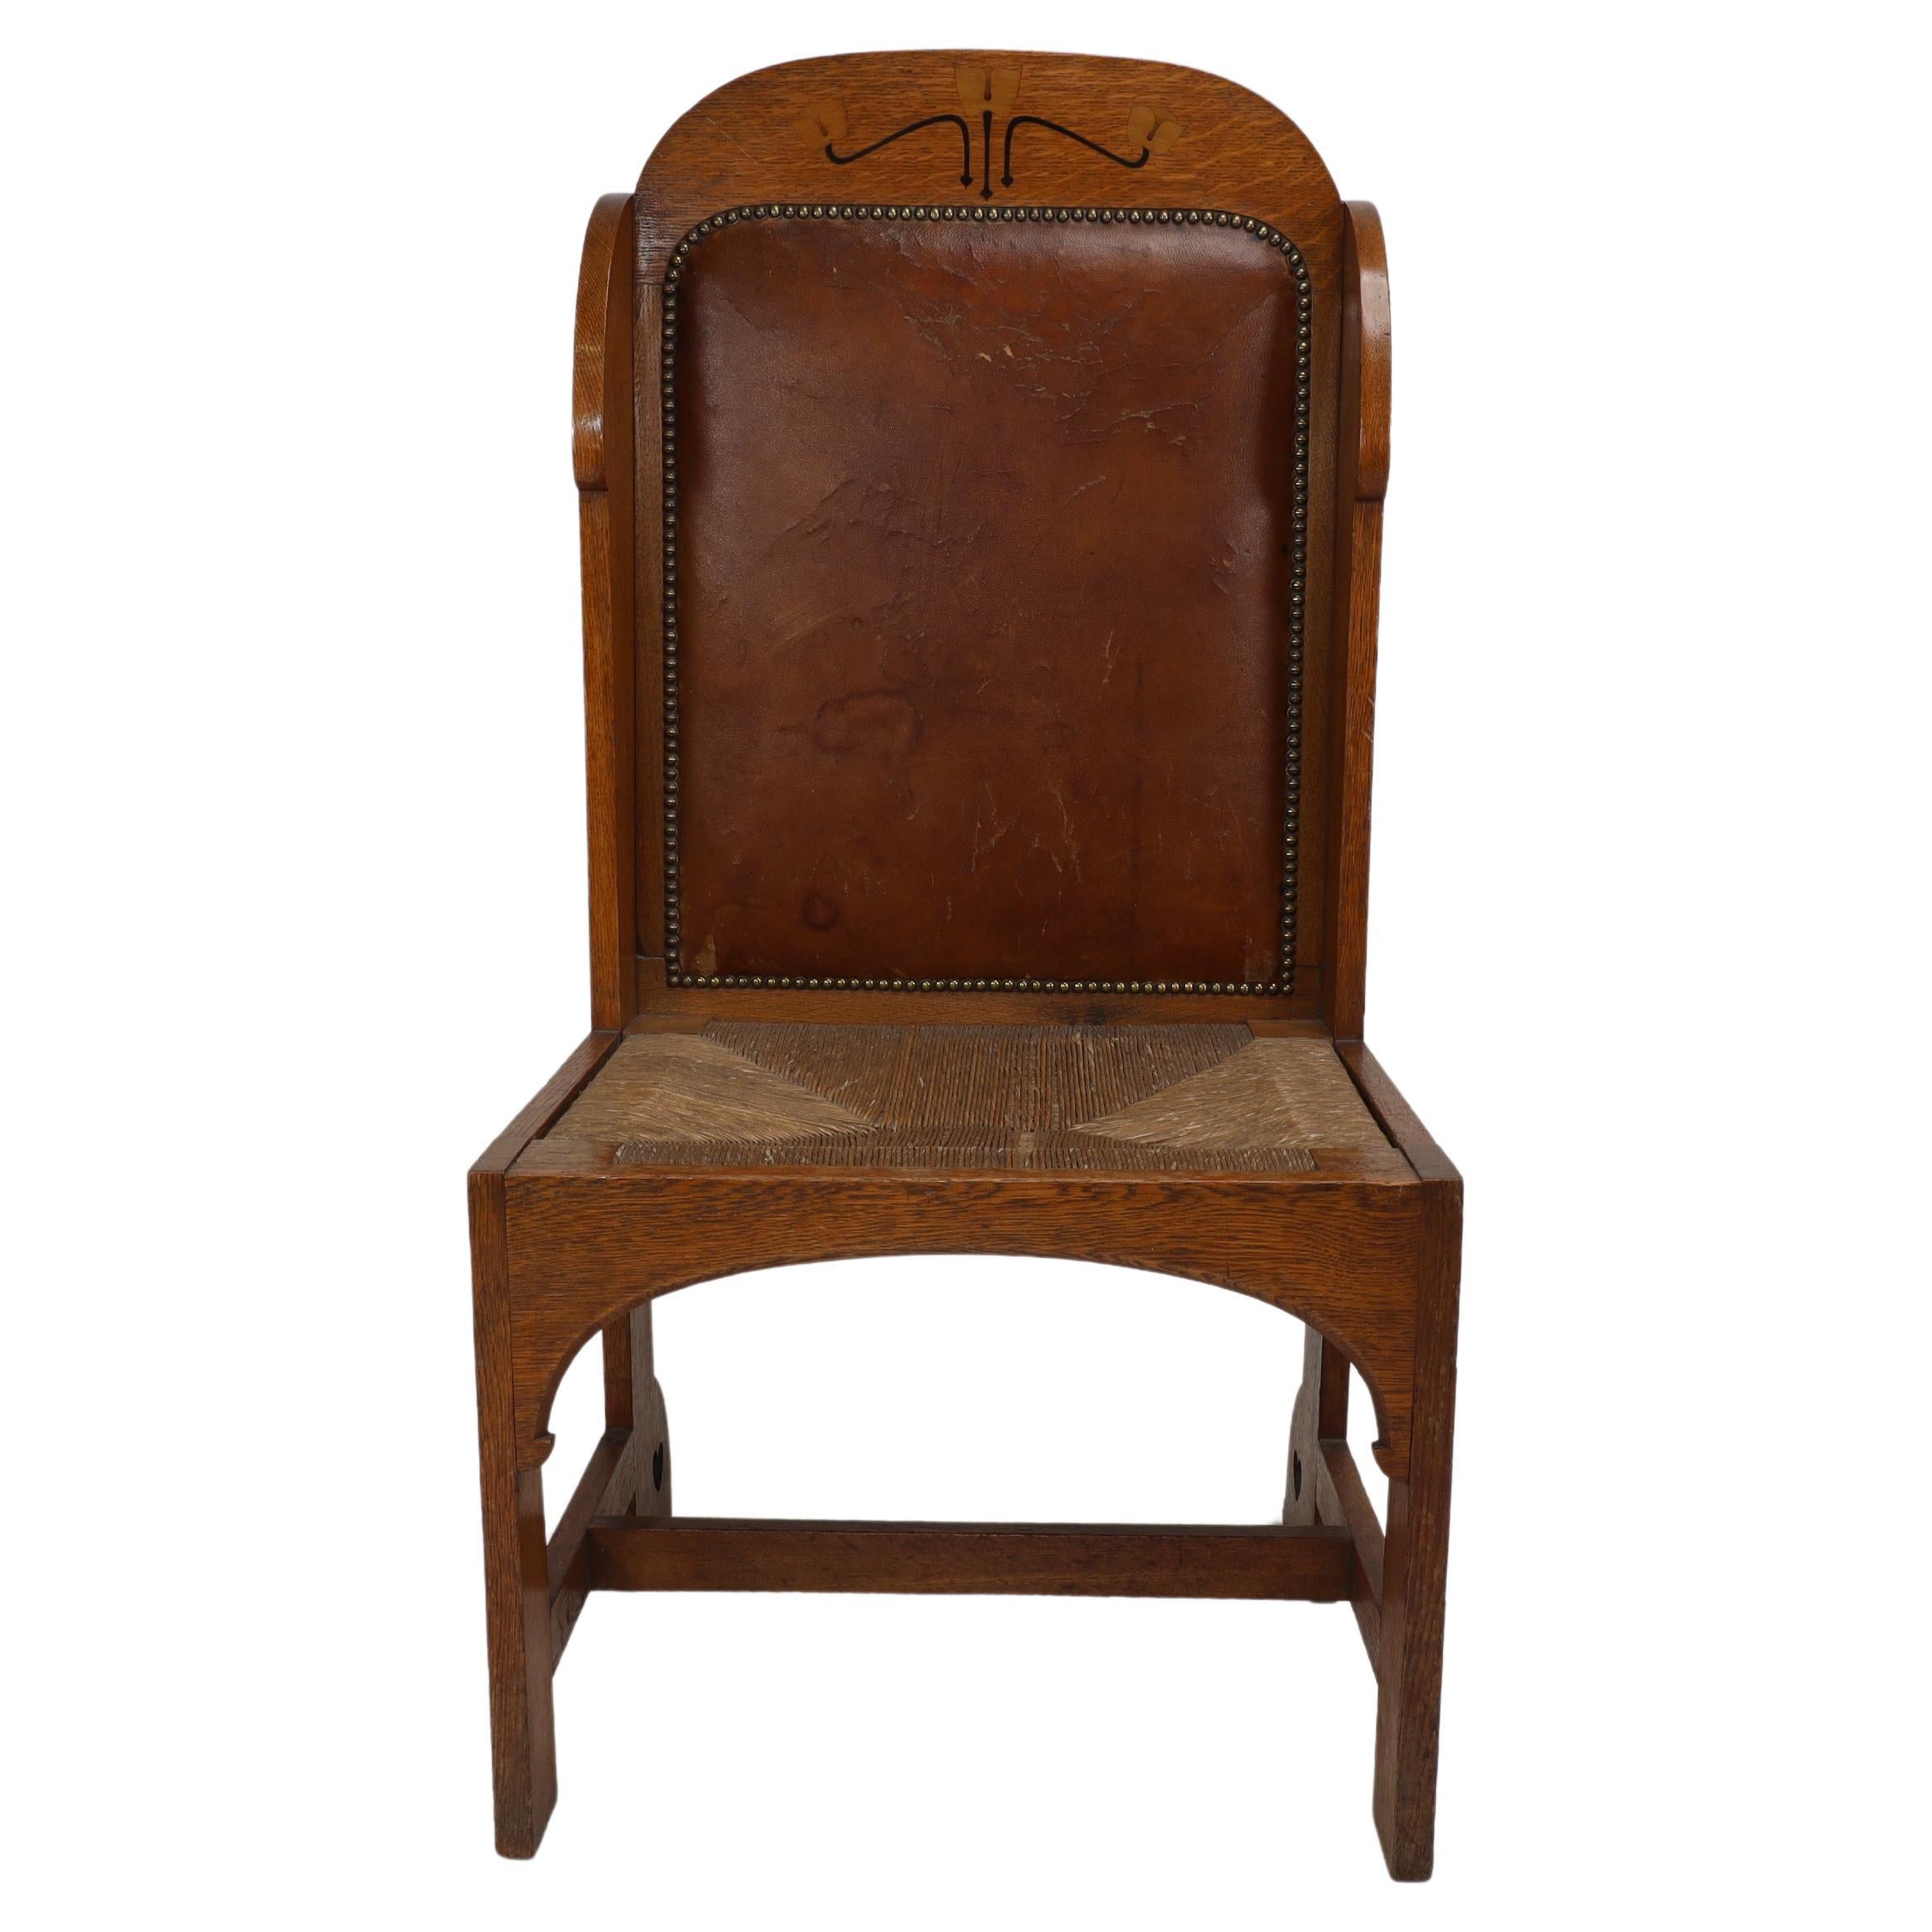 E G Punnet attributed. Probably made by William Birch. An oak wing back chair For Sale